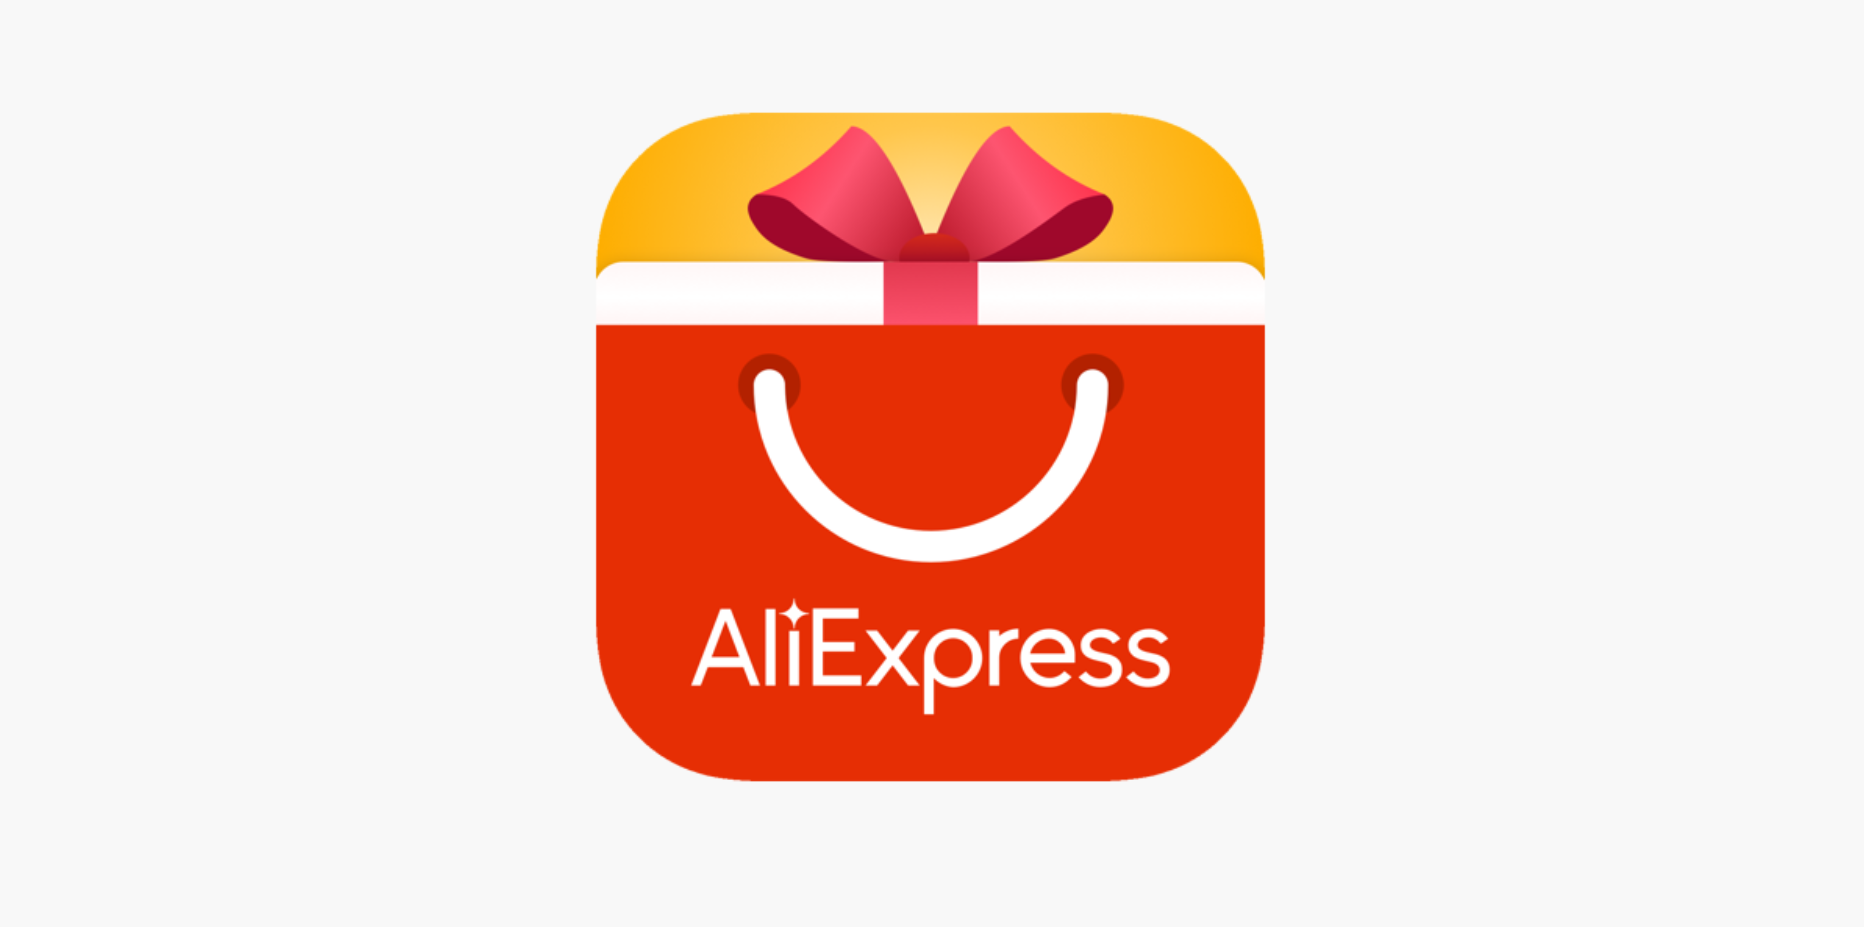 How to Dropship on Amazon from AliExpress